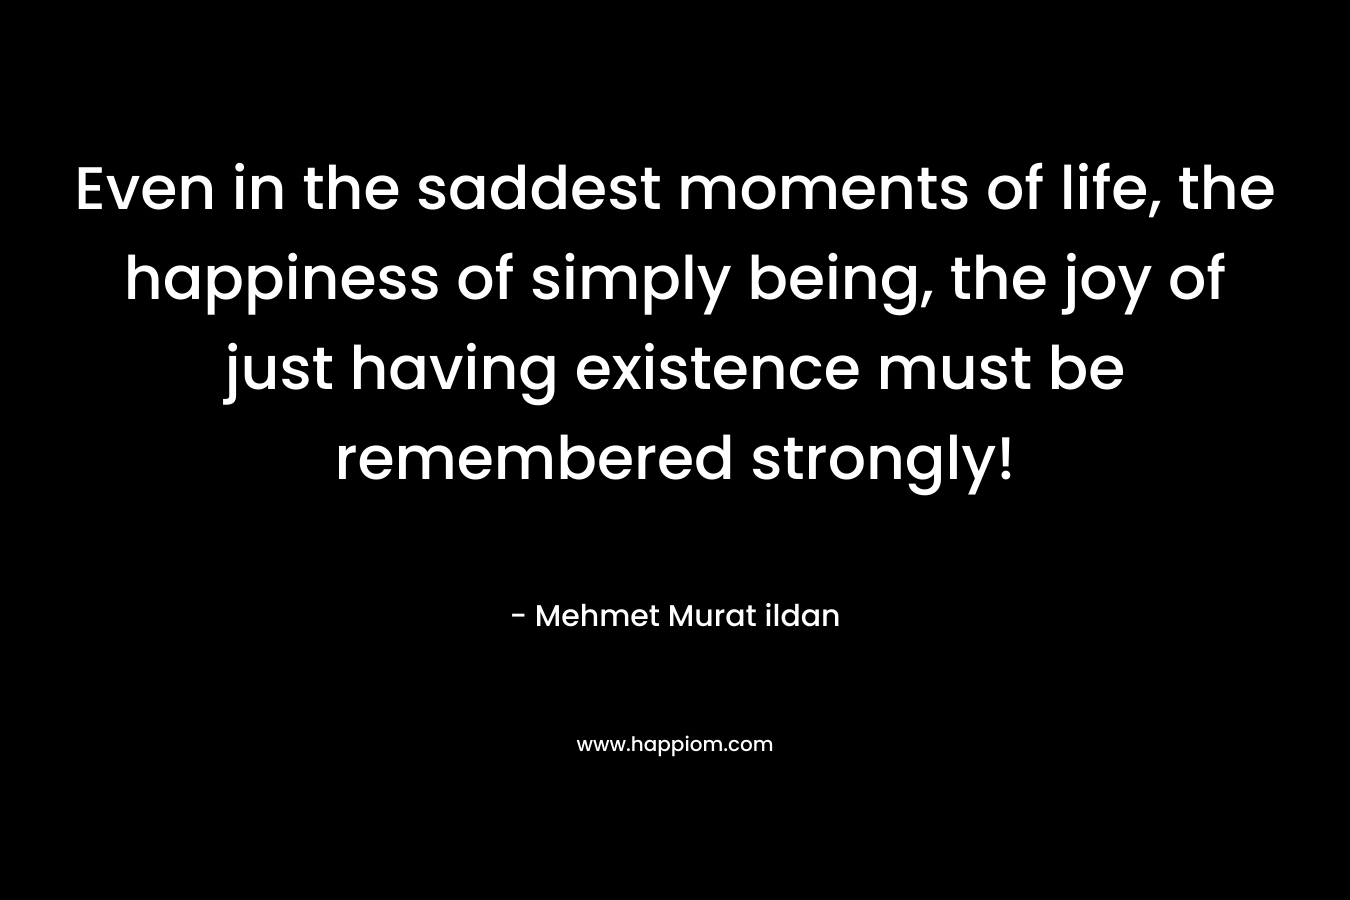 Even in the saddest moments of life, the happiness of simply being, the joy of just having existence must be remembered strongly! – Mehmet Murat ildan